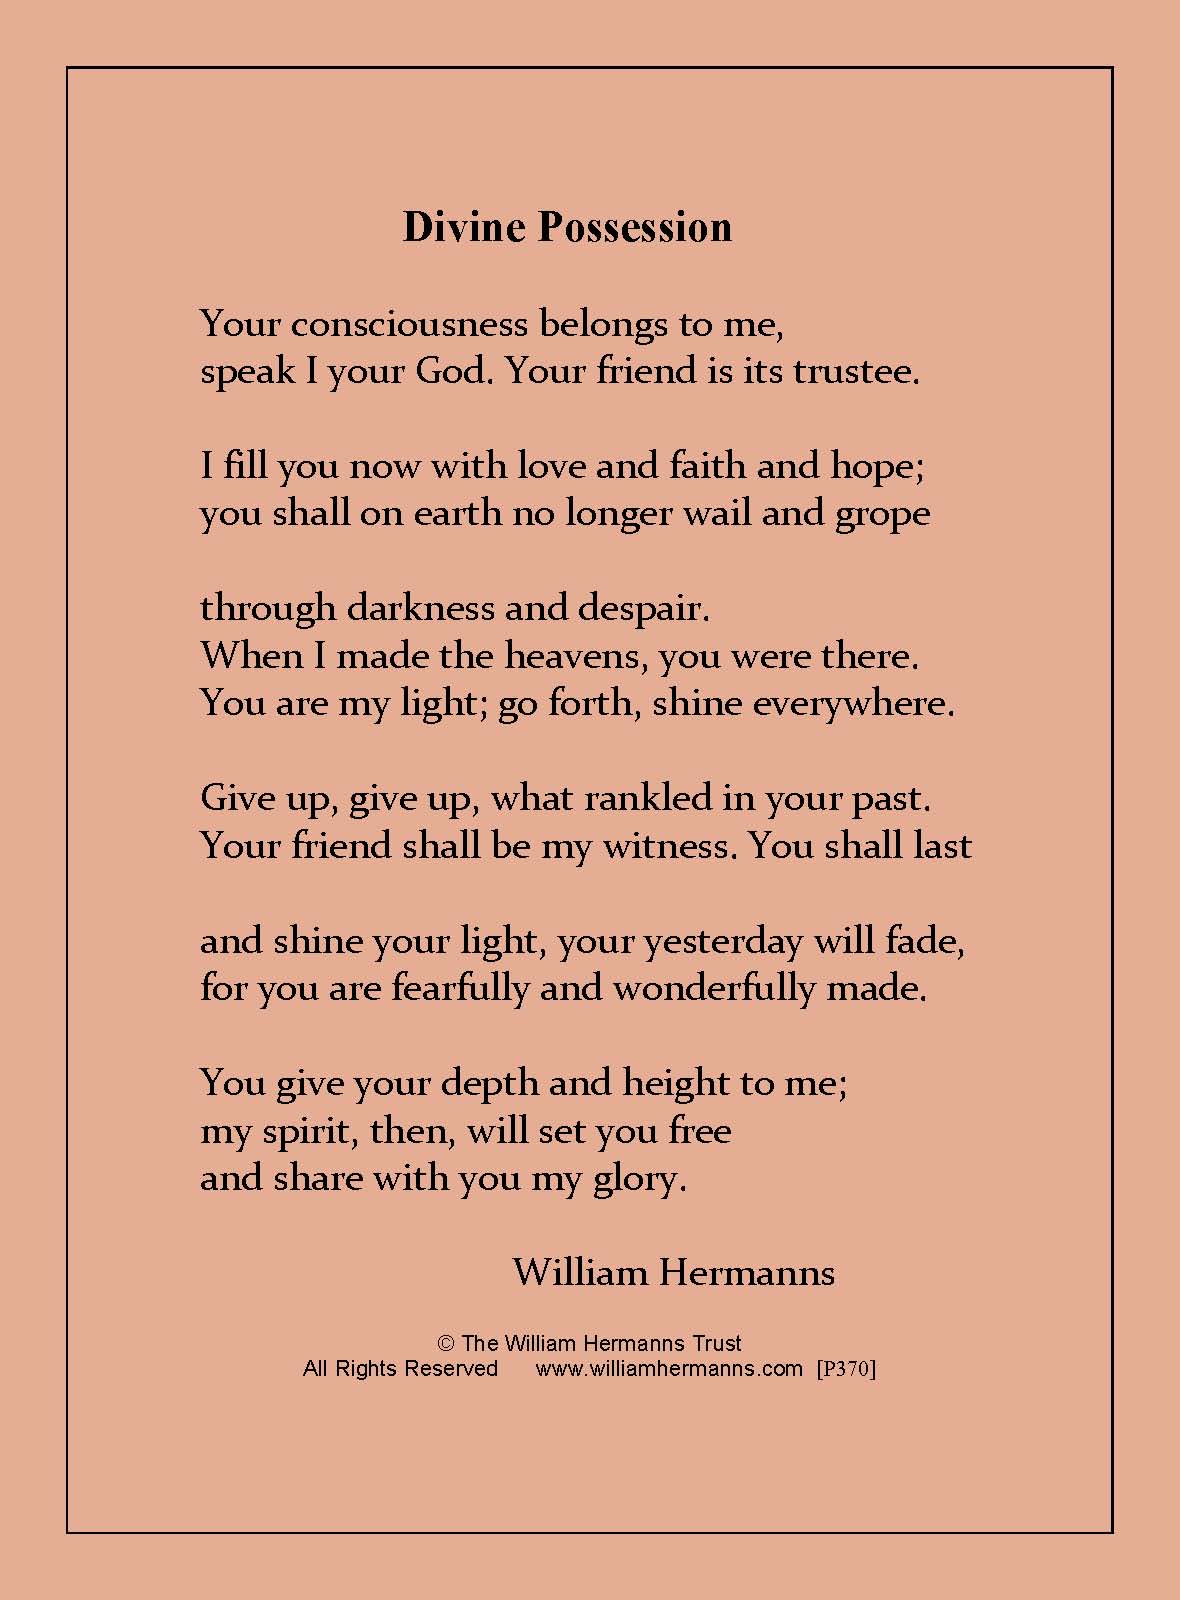 Divine Possession by William Hermanns